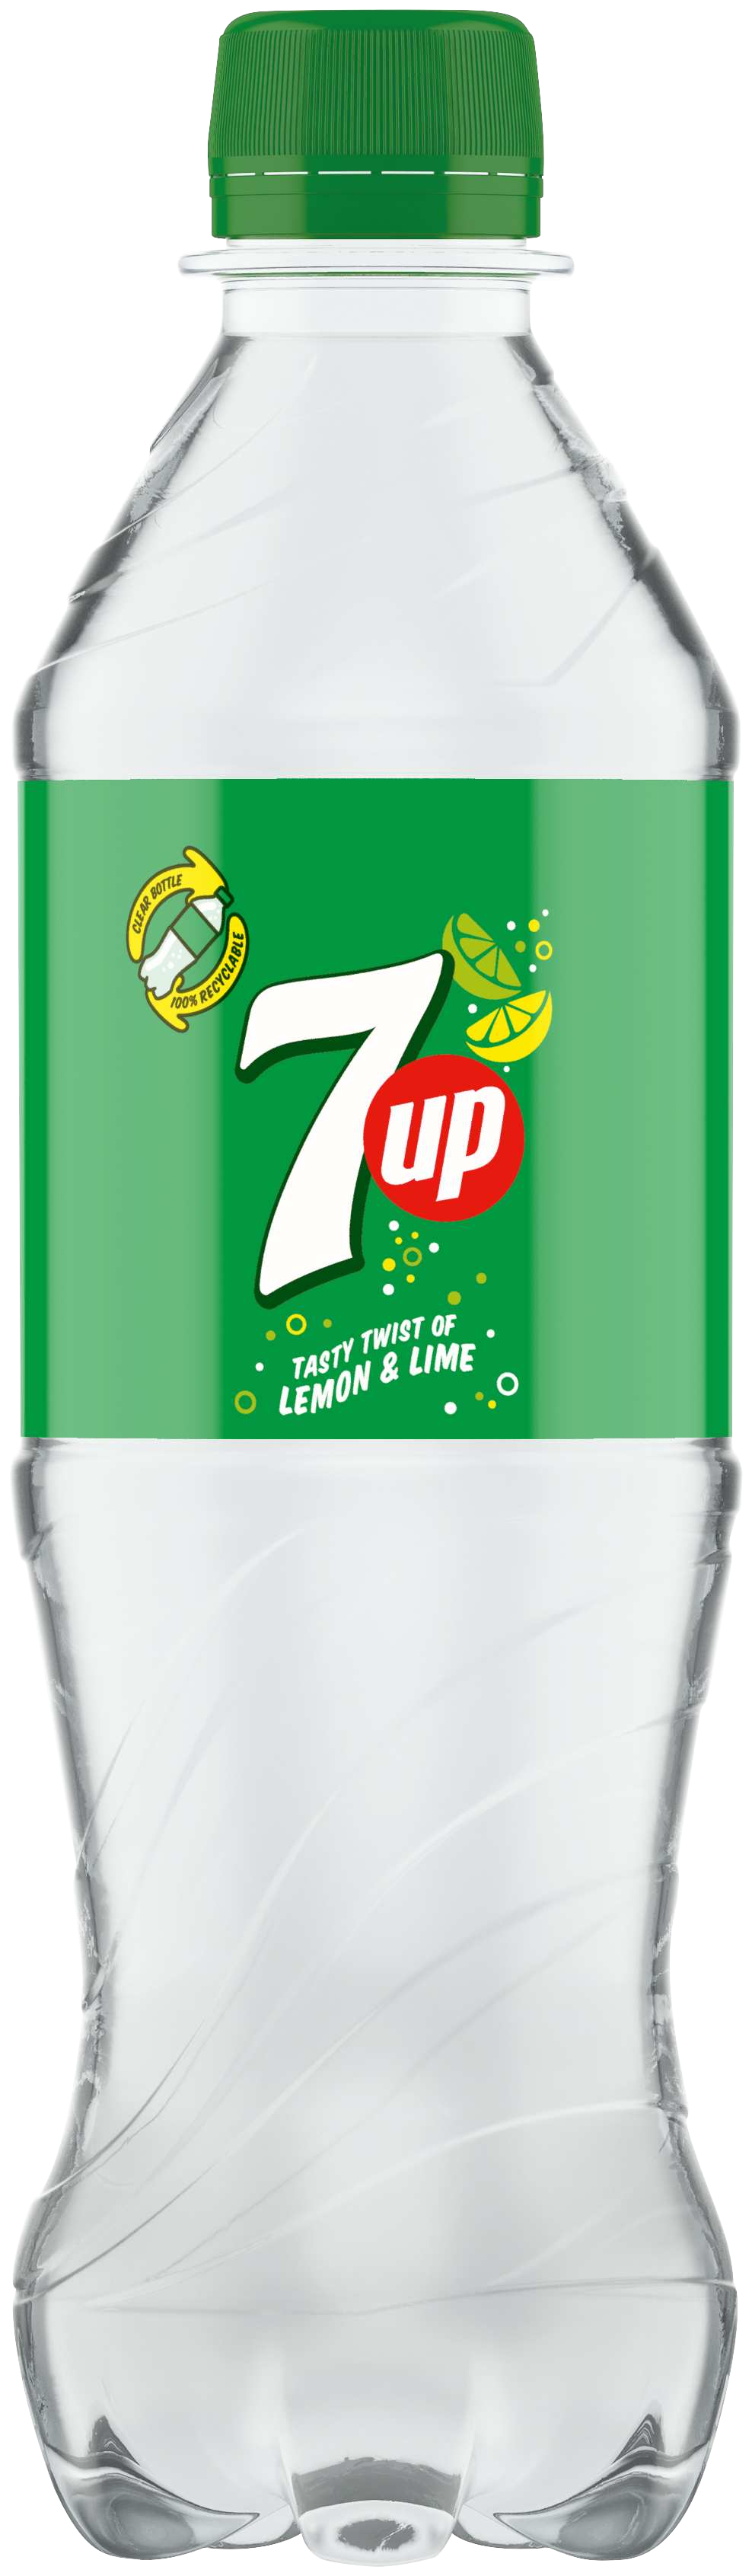 7UP moves to clear bottles